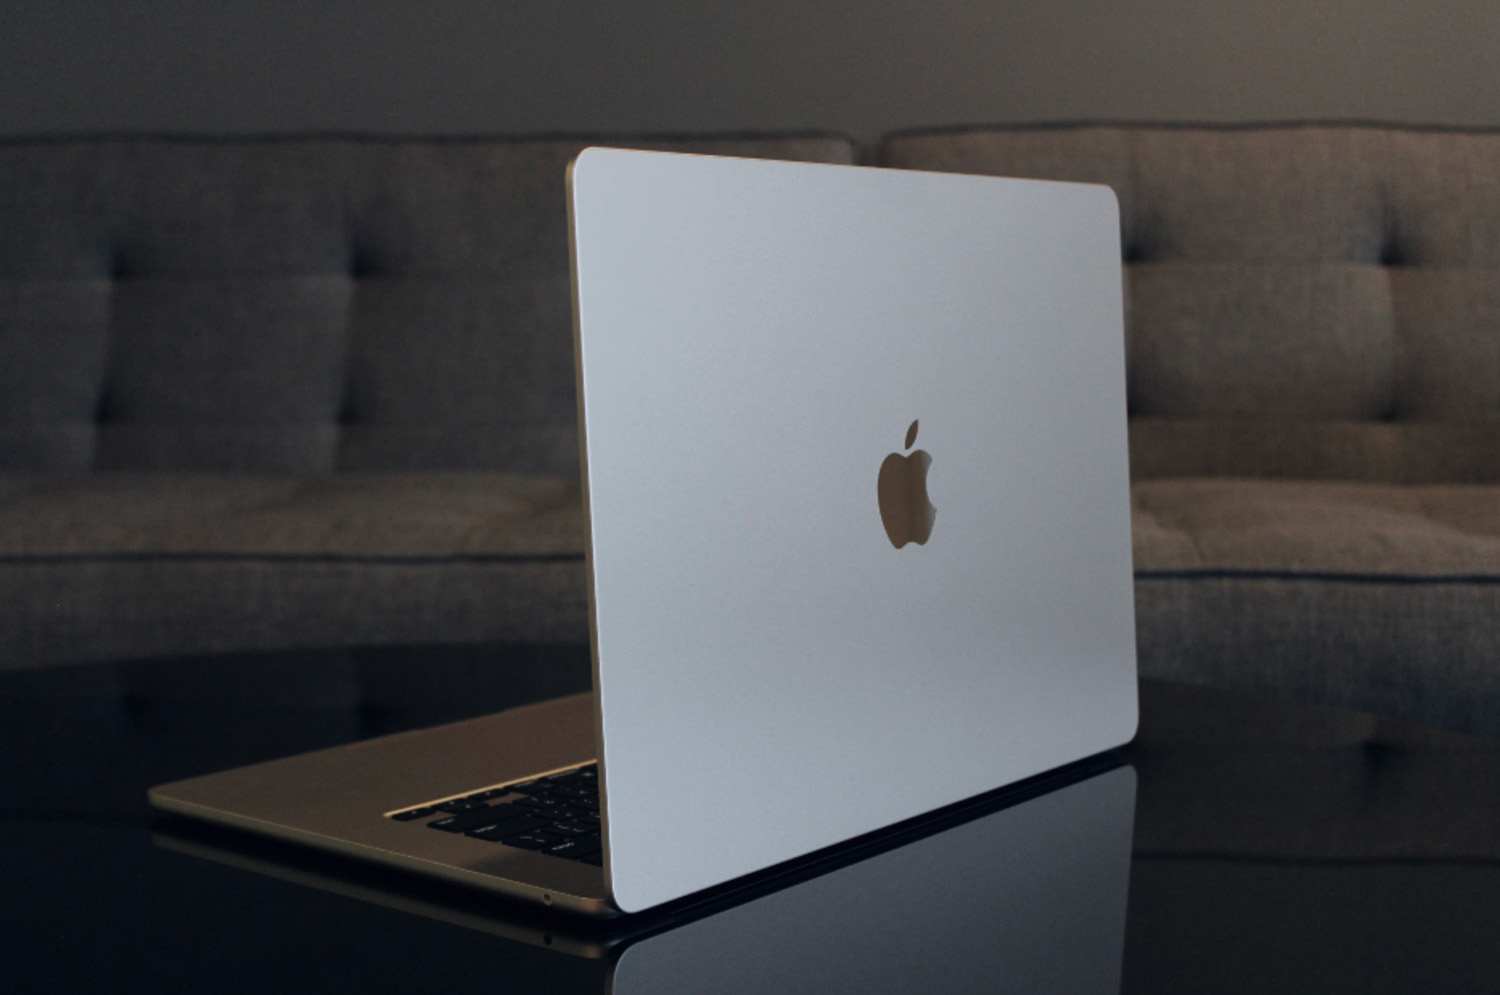 Apple MacBook Air 15-Inch Review: The Best Portable Big Display